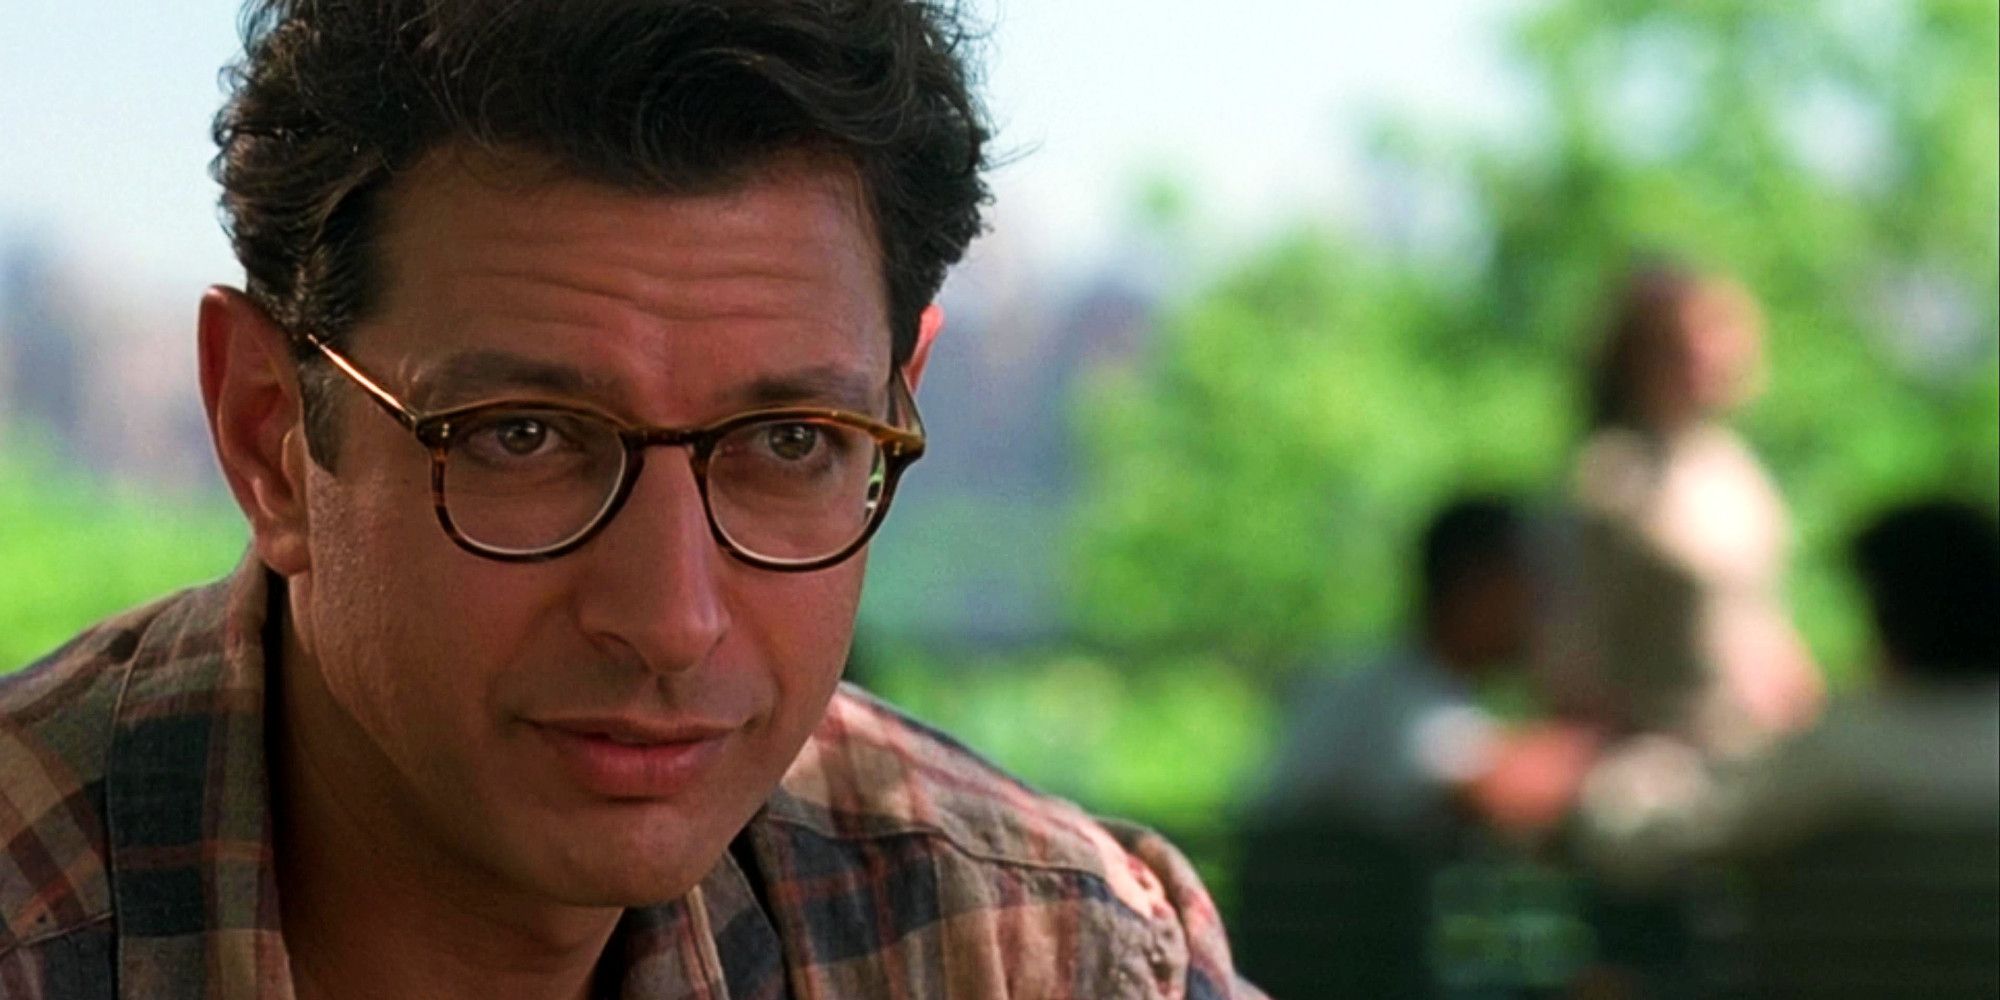 Jeff Goldblum as David Levinson in Independence Day